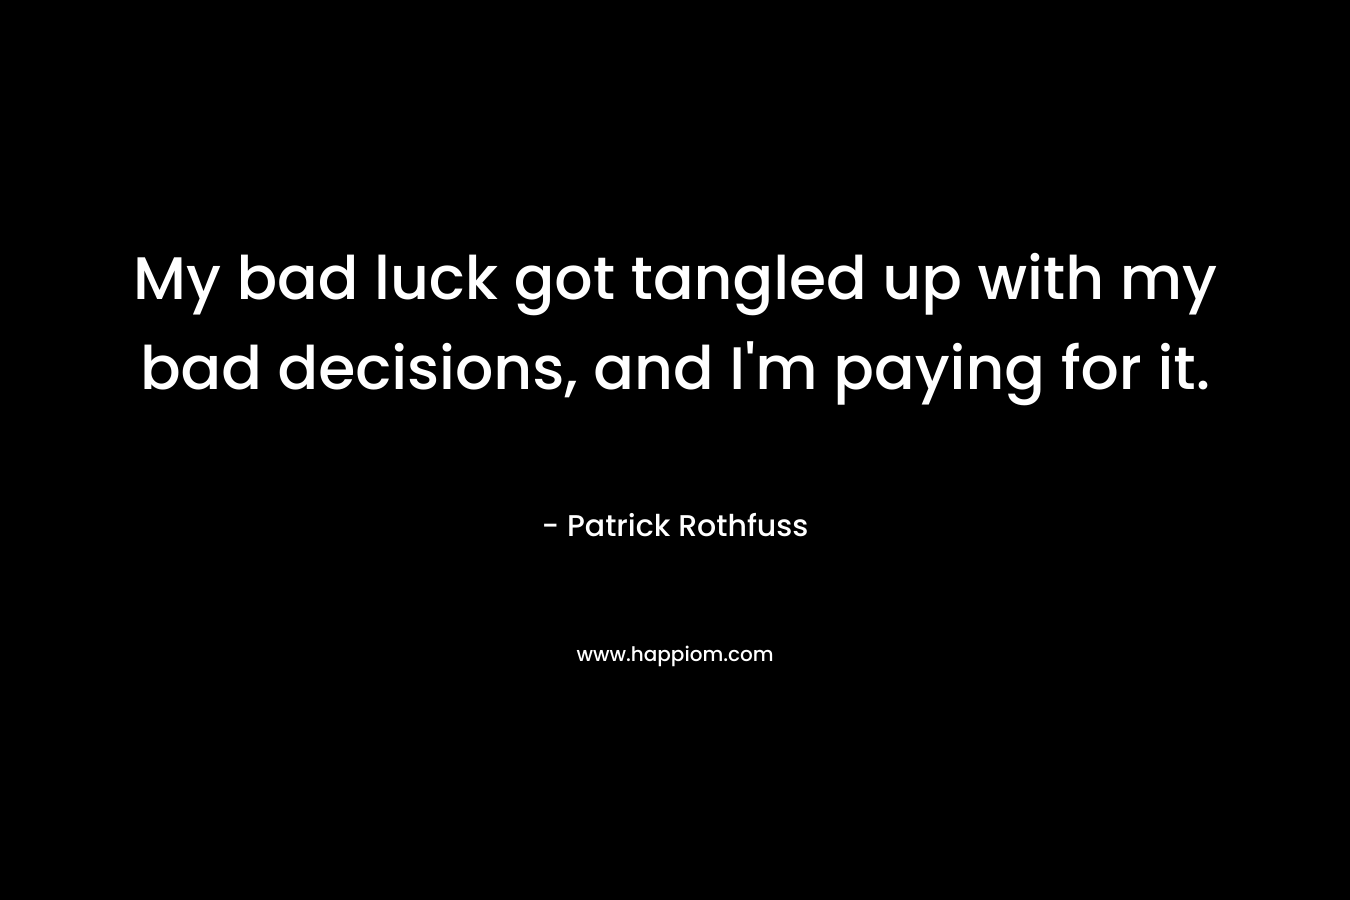 My bad luck got tangled up with my bad decisions, and I’m paying for it. – Patrick Rothfuss